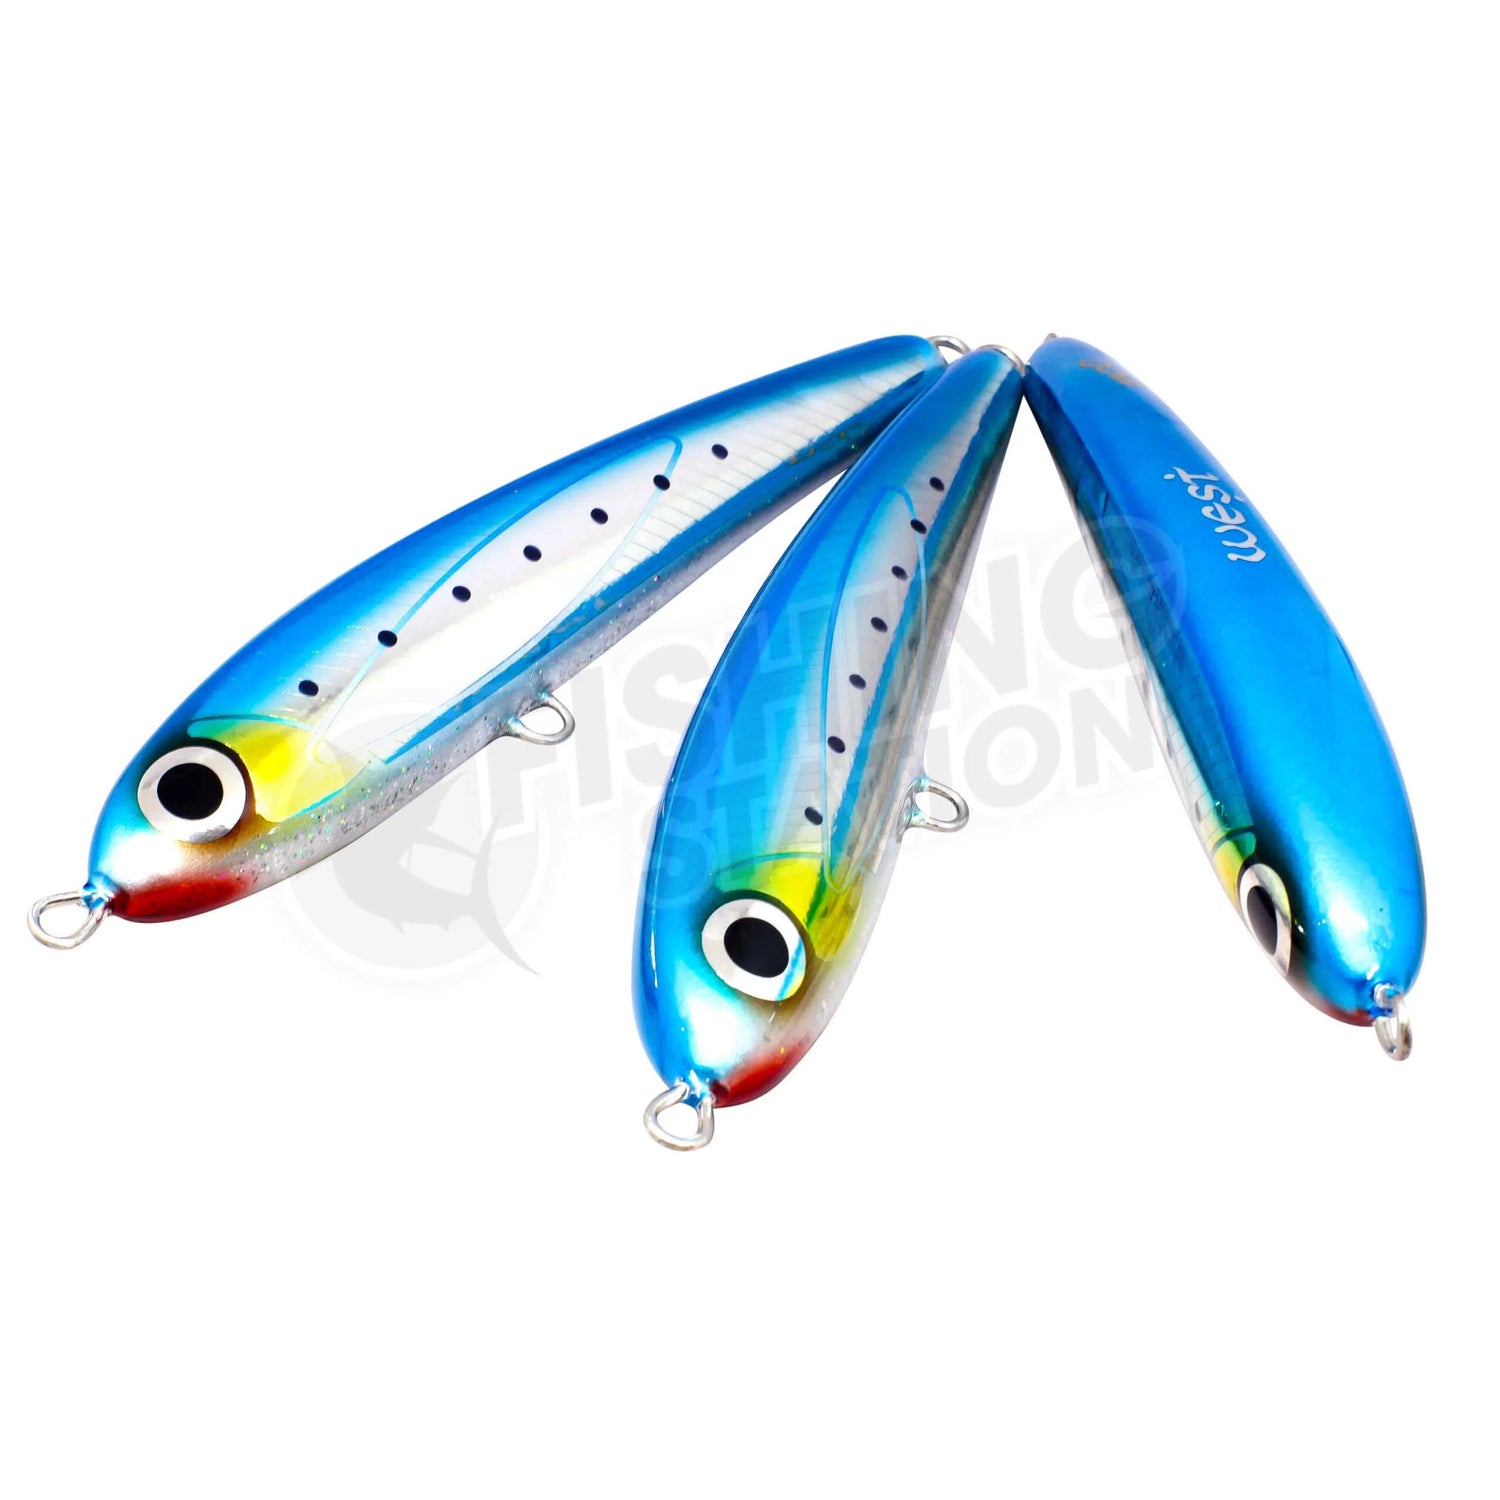 Buy fishing lure foil Online in Seychelles at Low Prices at desertcart